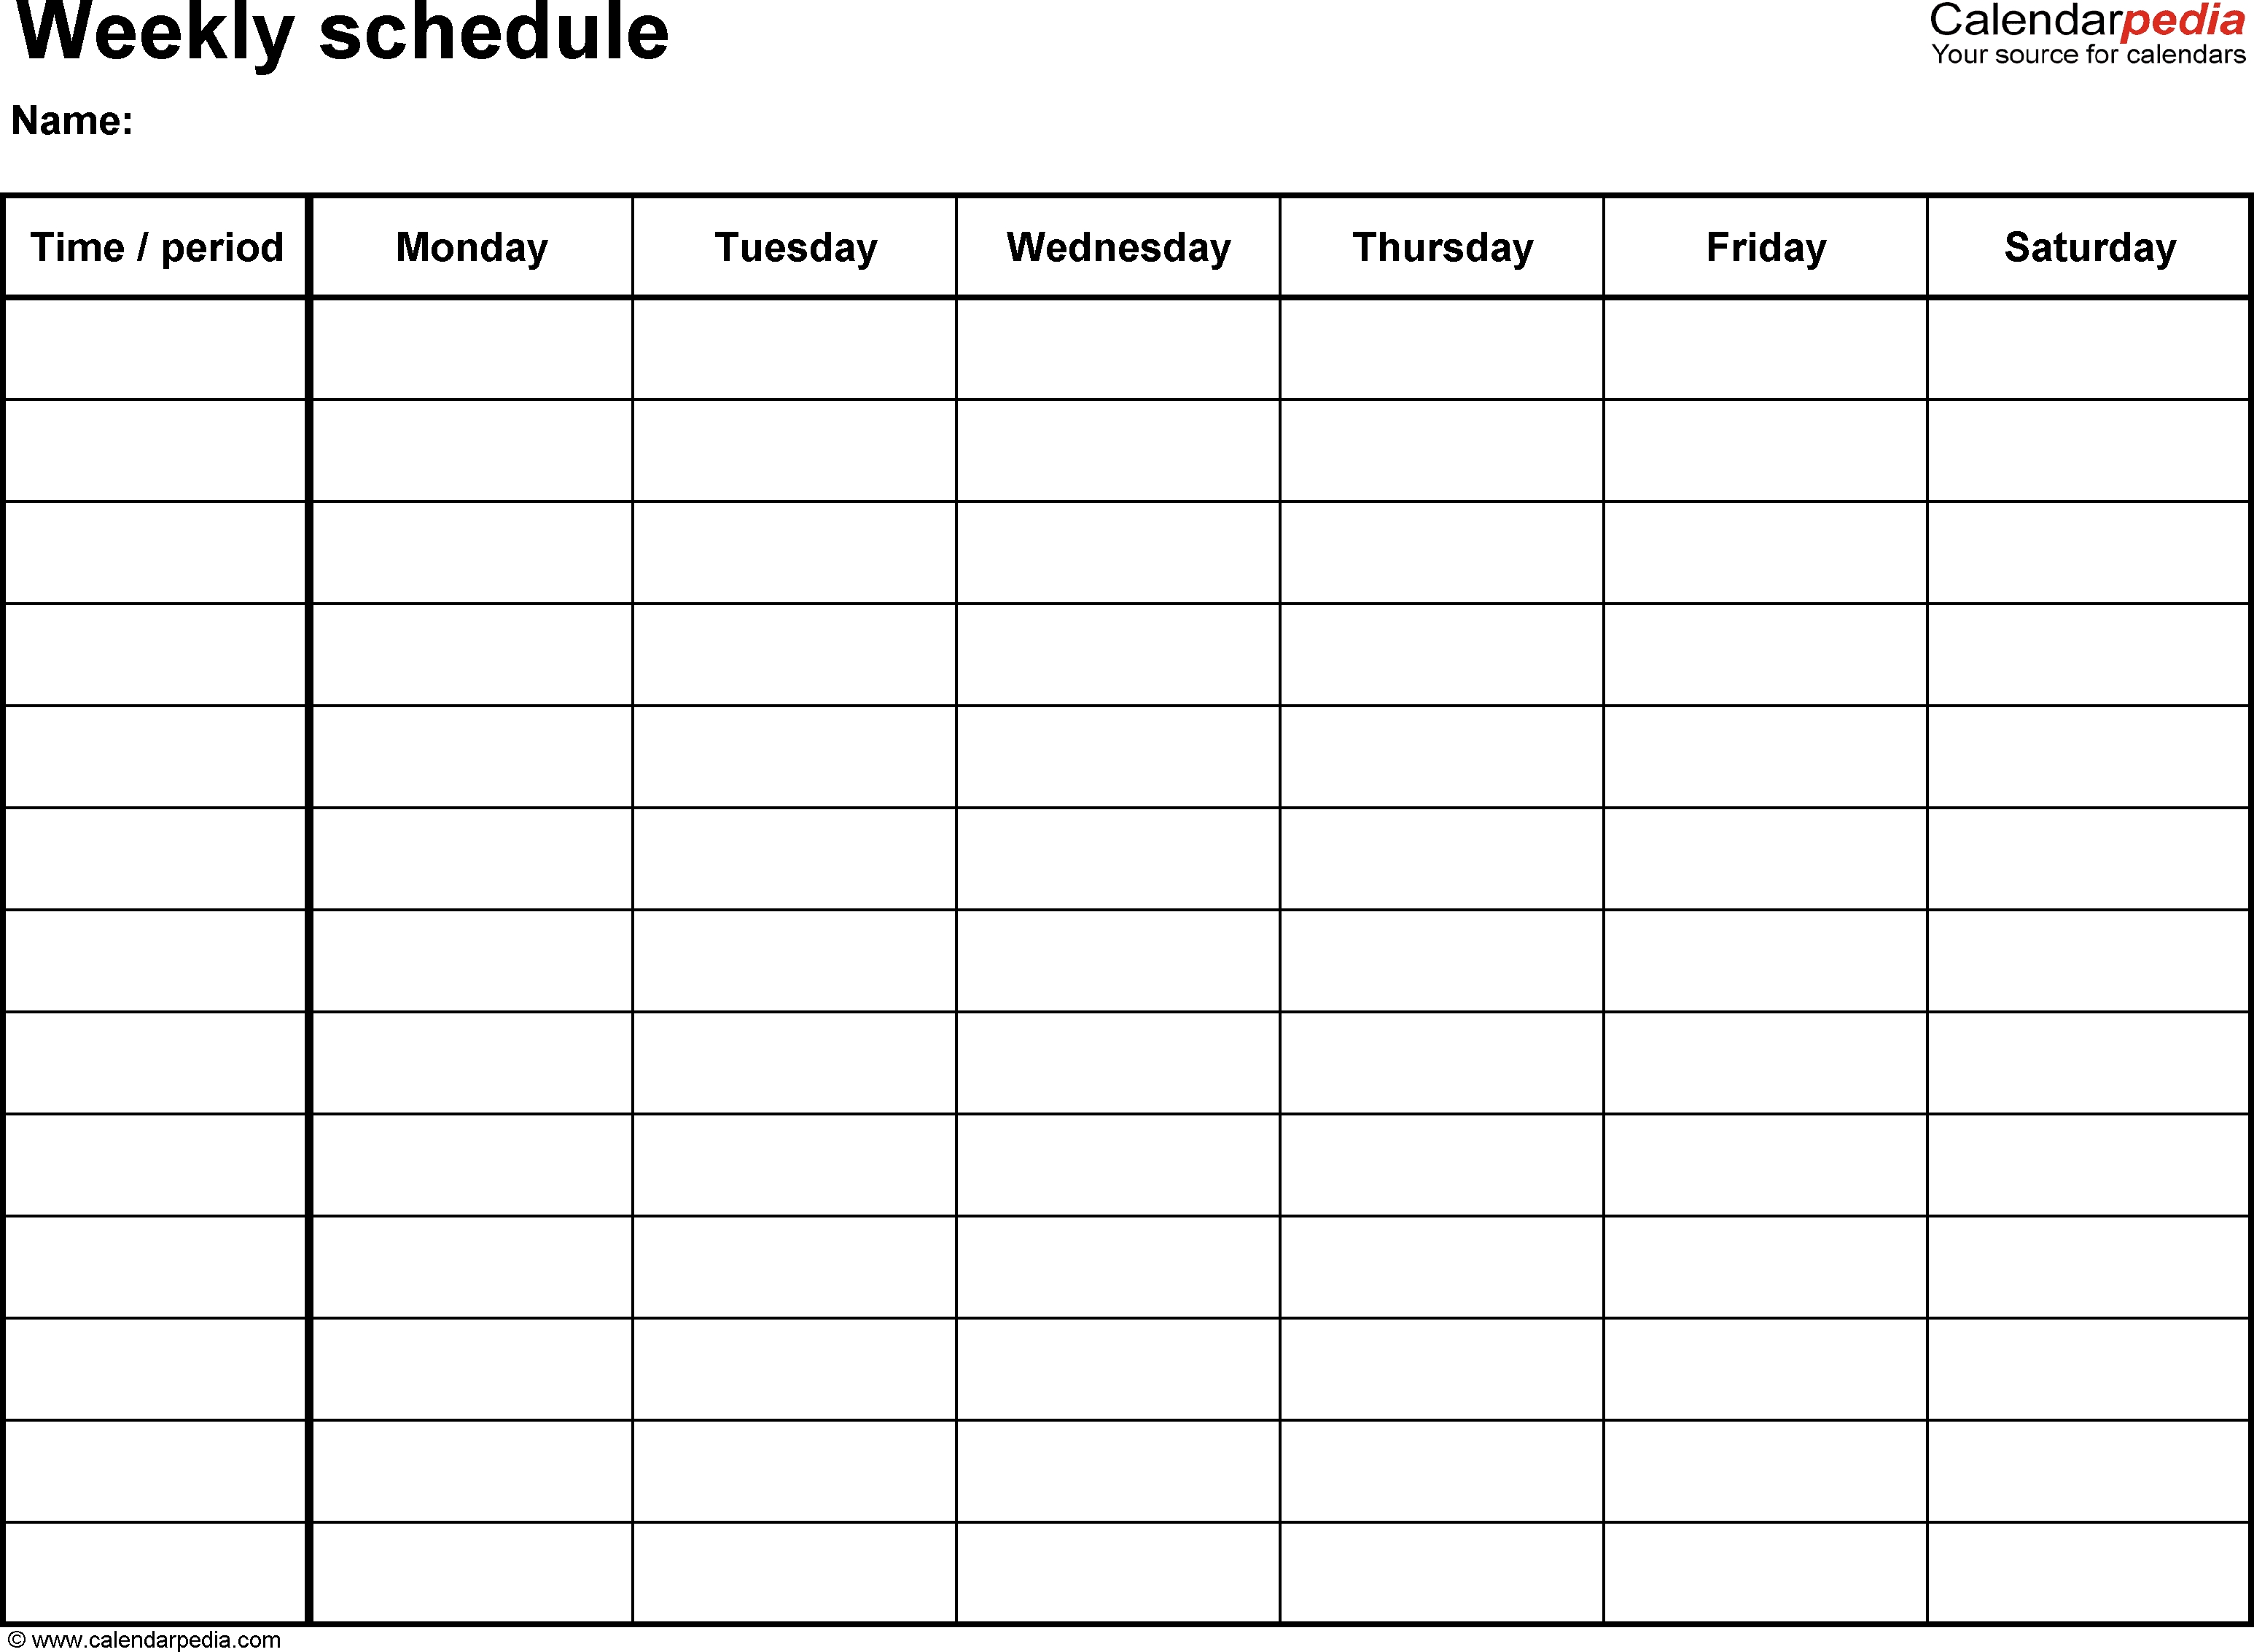 Free Weekly Schedule Templates For Excel - 18 Templates within Week Five Date Calendars Templates